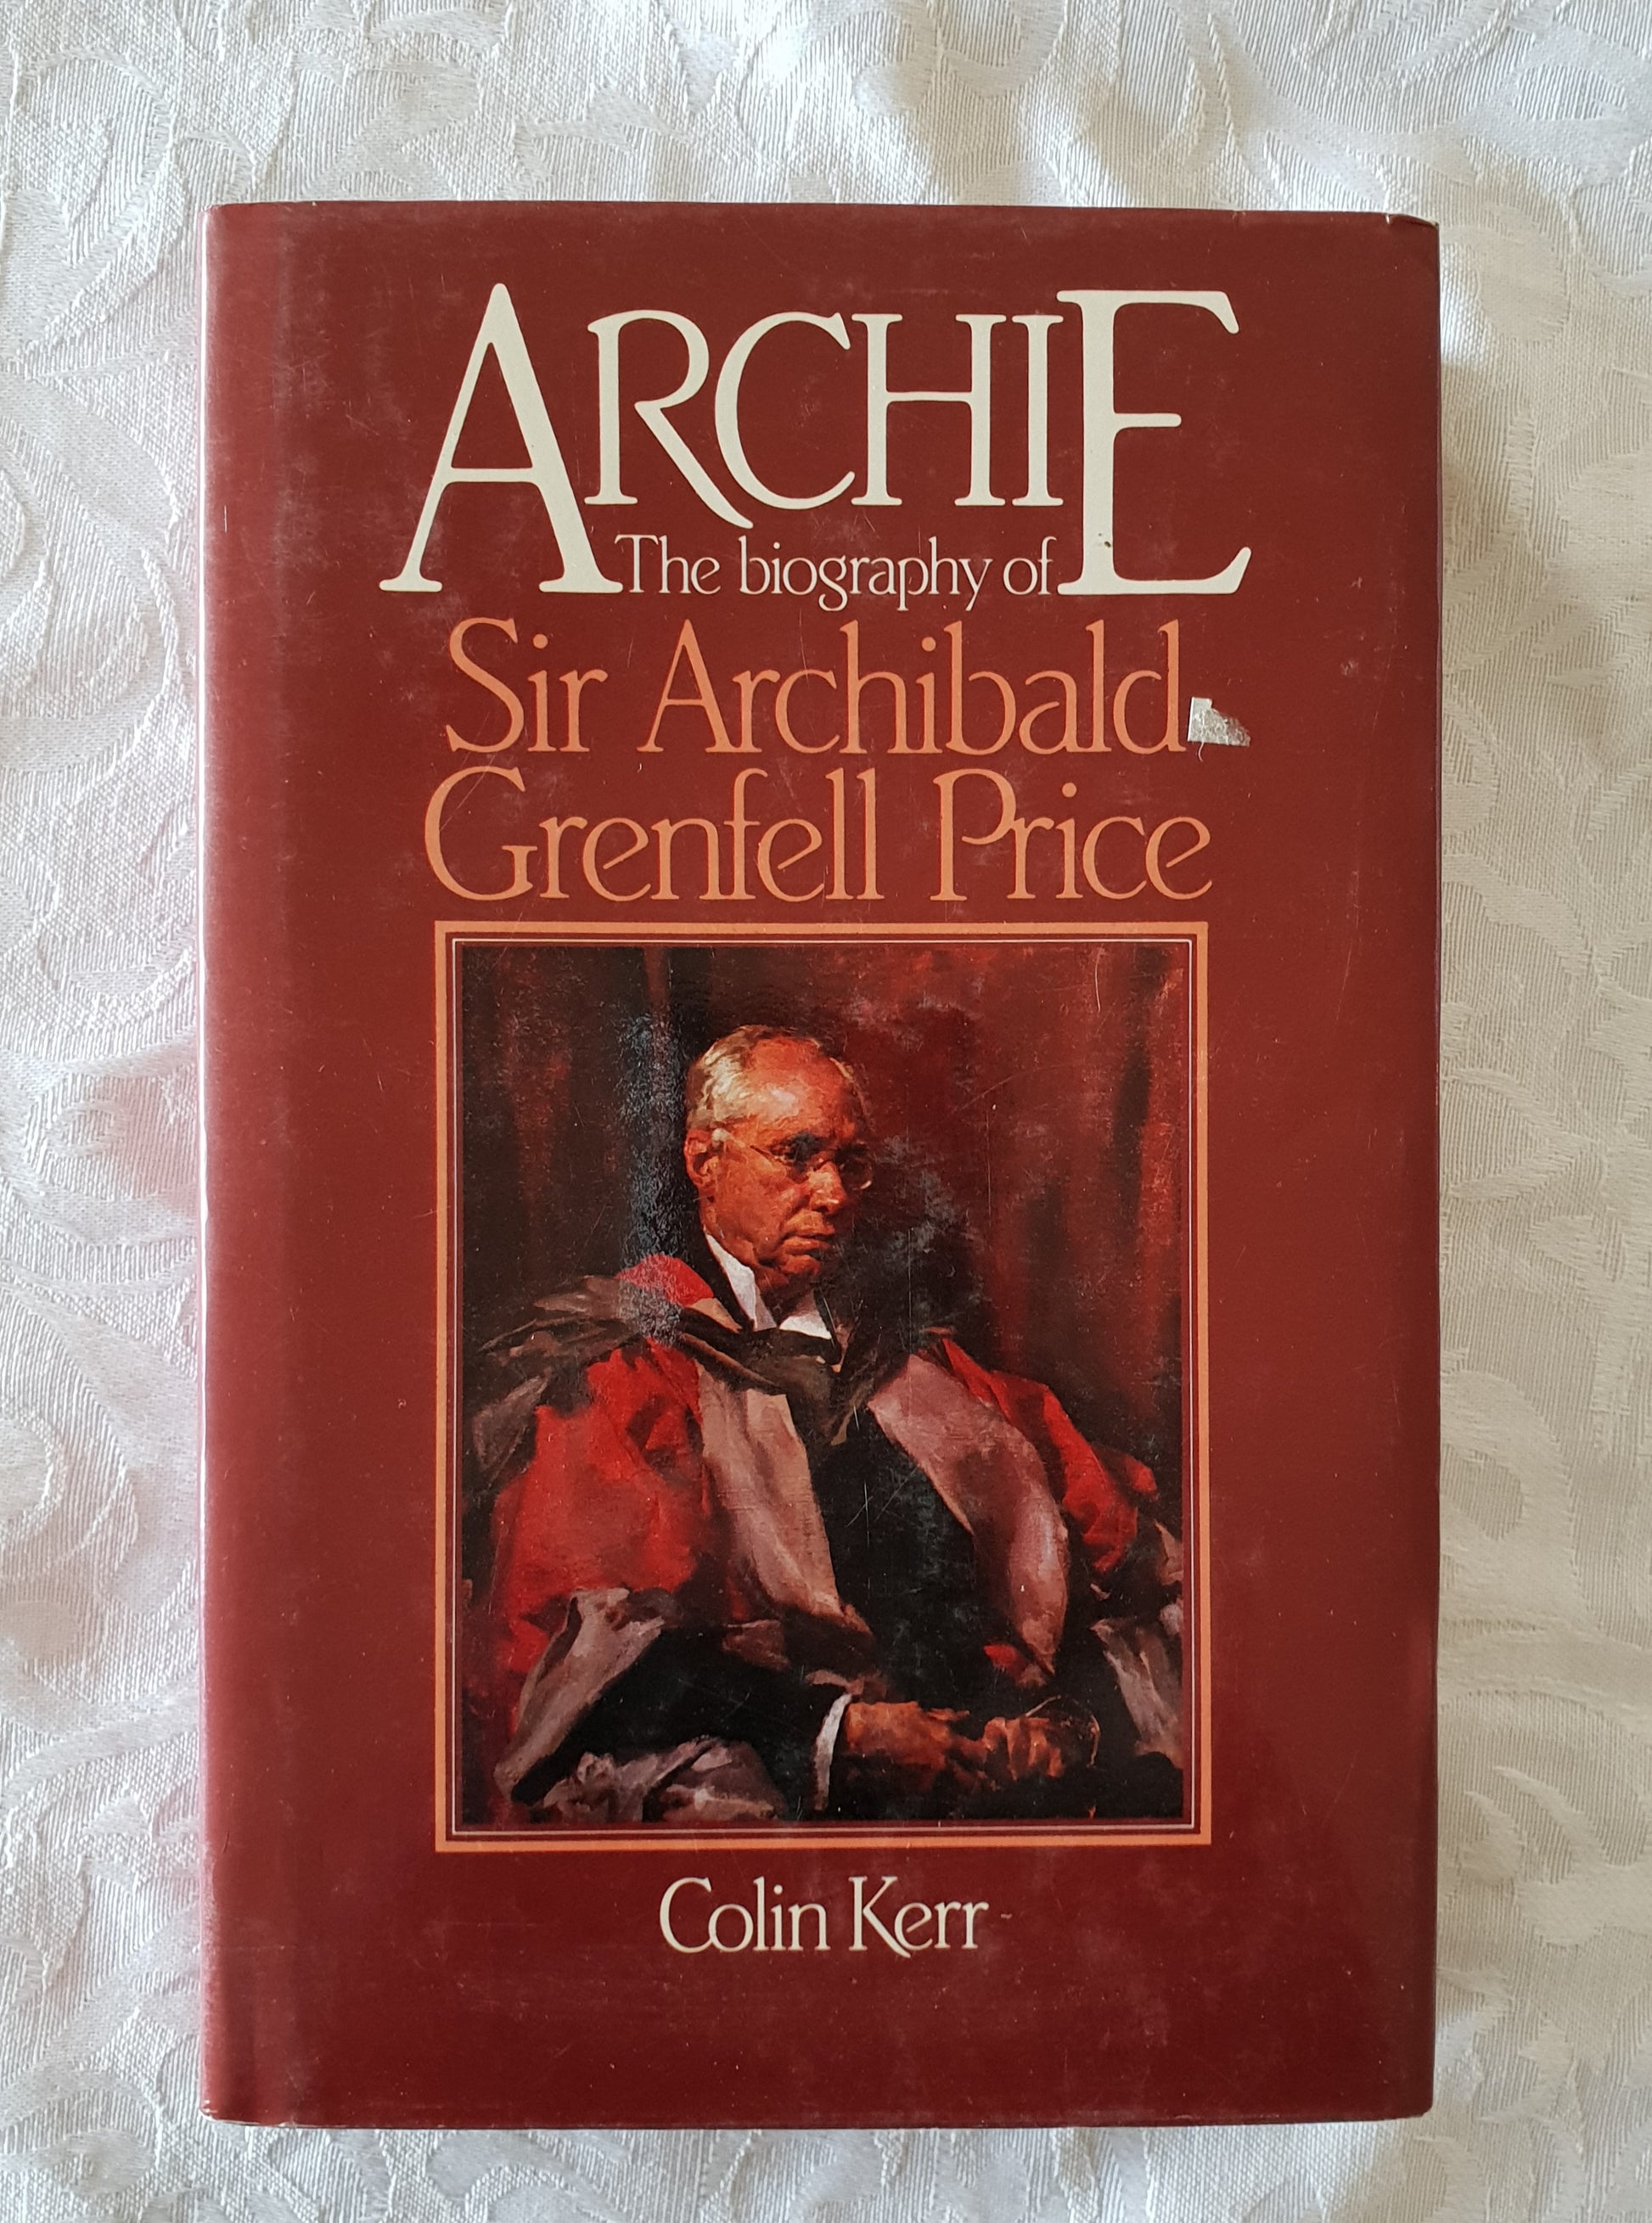 Archie The Biography of Sir Archibald Grenfell Price  by Colin Kerr